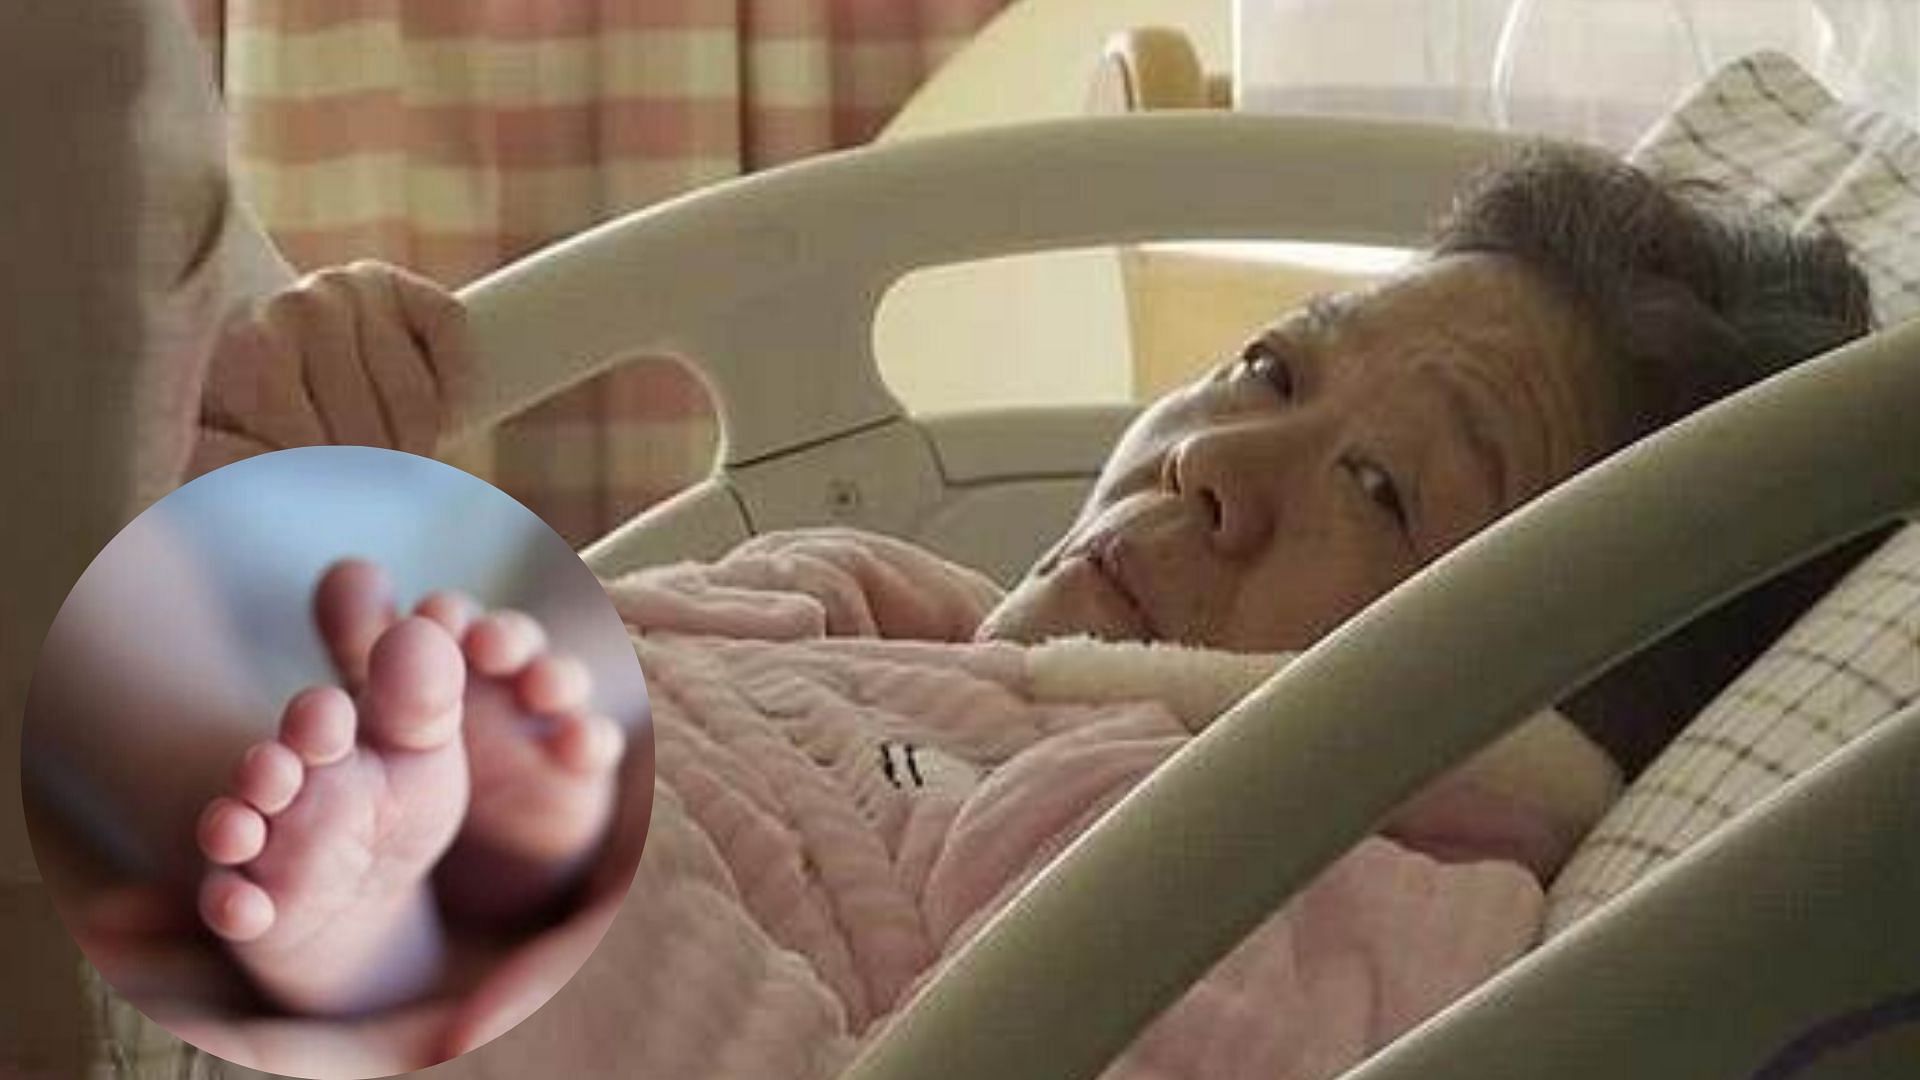 Chinese women give birth a child in 67 year and become world oldest new mother